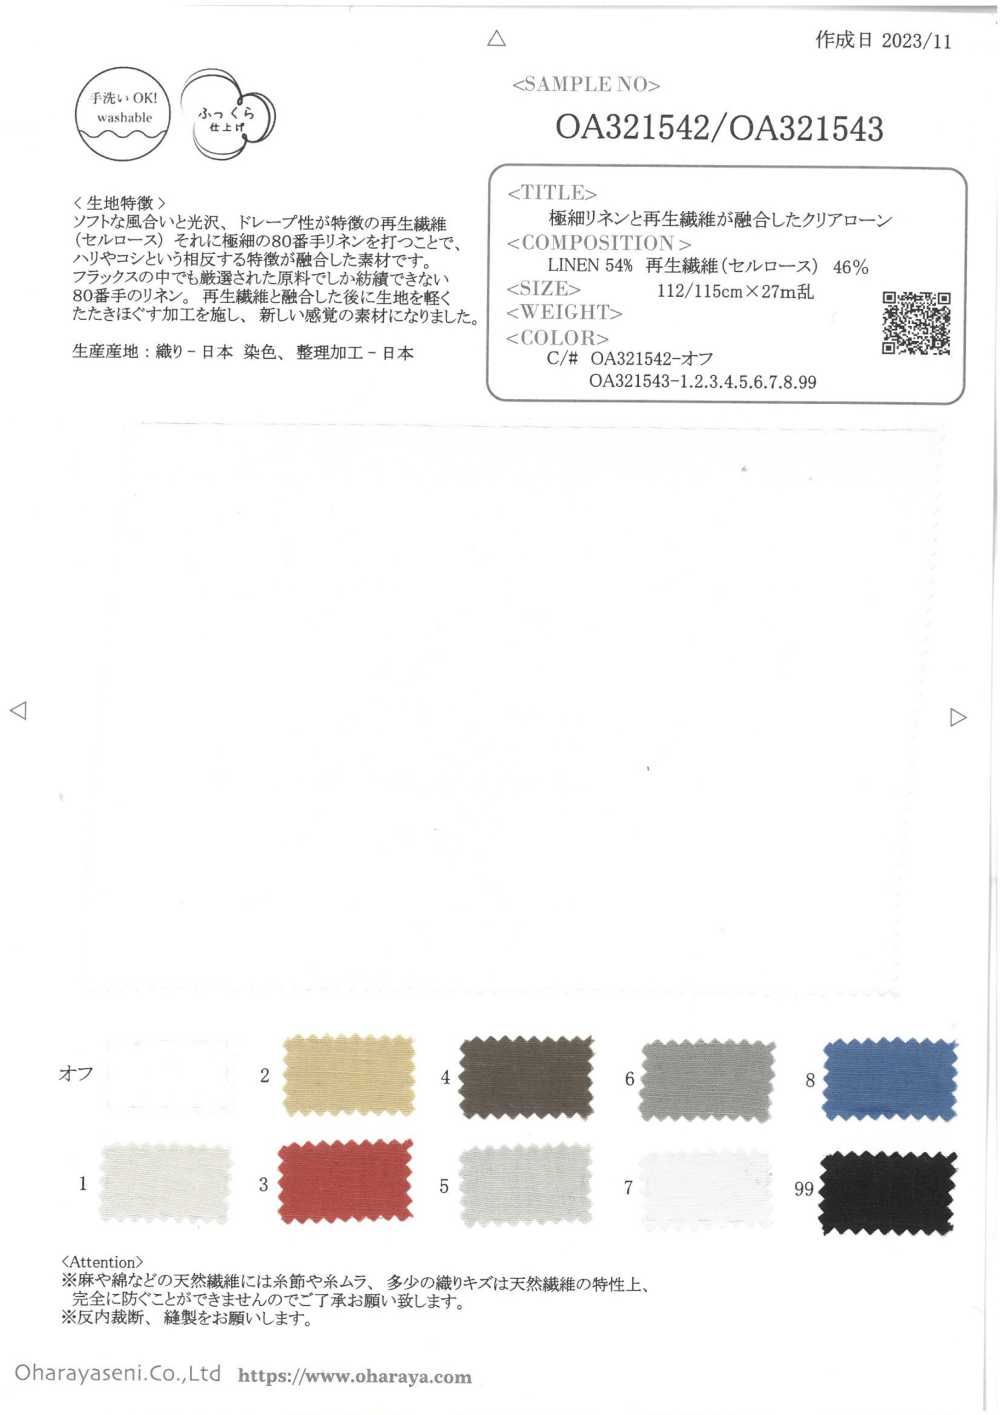 OA321542 Clear Lawn That Combines Ultra-fine Linen And Recycled Fibers[Textile / Fabric] Oharayaseni